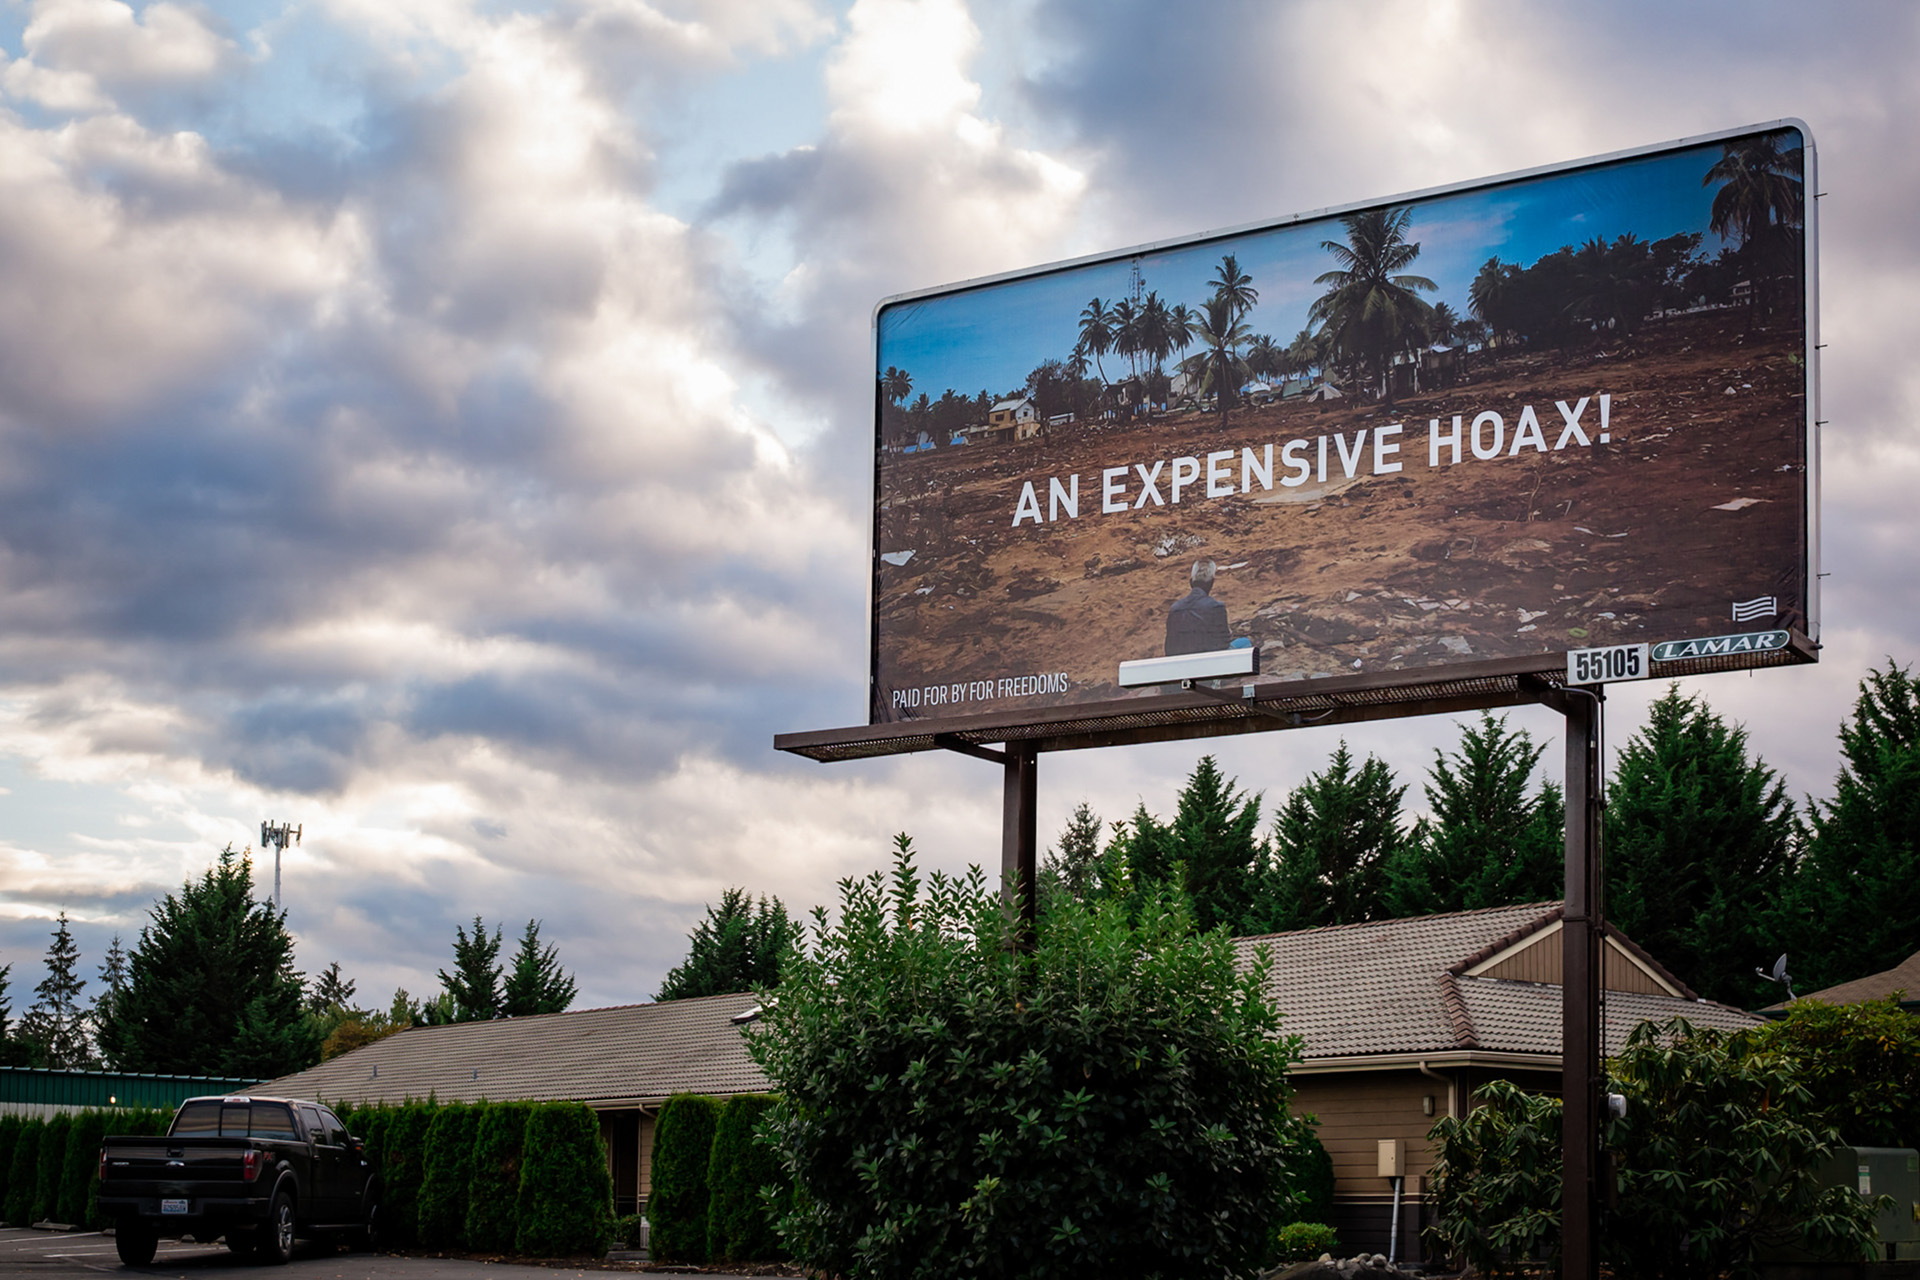 Billboard in town depicts "an expensive hoax" text 